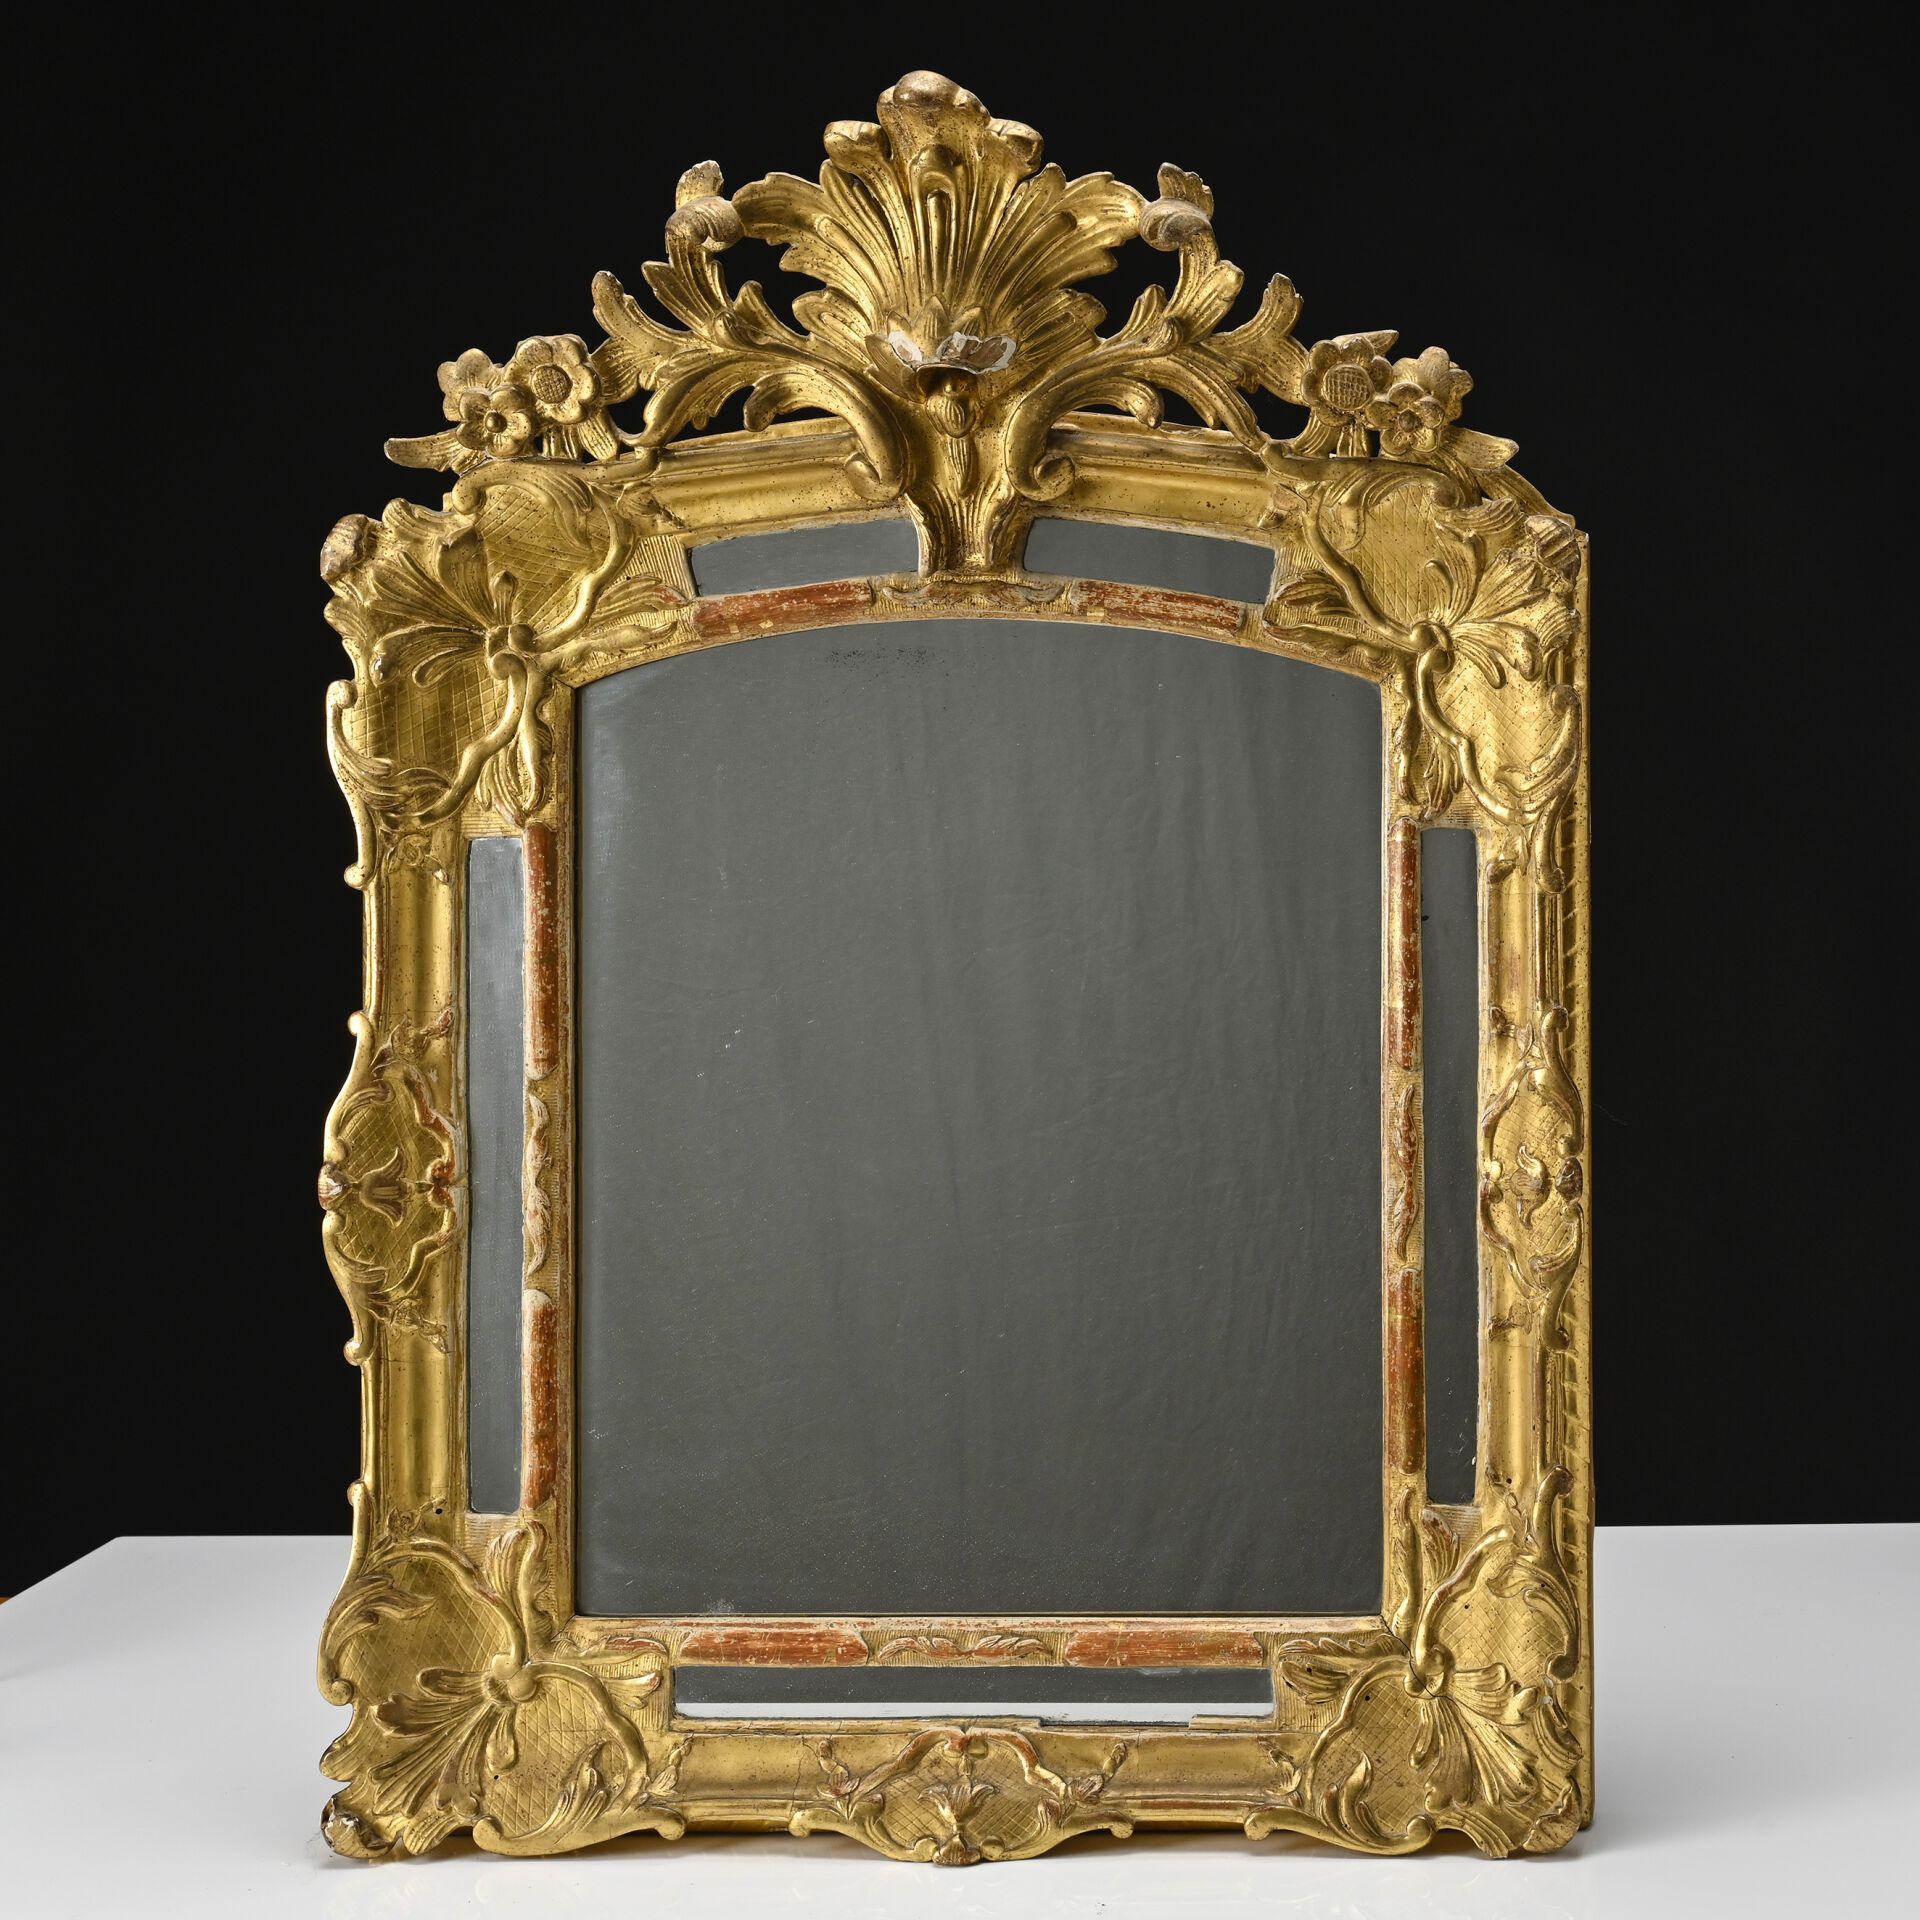 Null Carved giltwood mirror
Louis XV period
85 x 60 cm
(modern mirror, small chi&hellip;